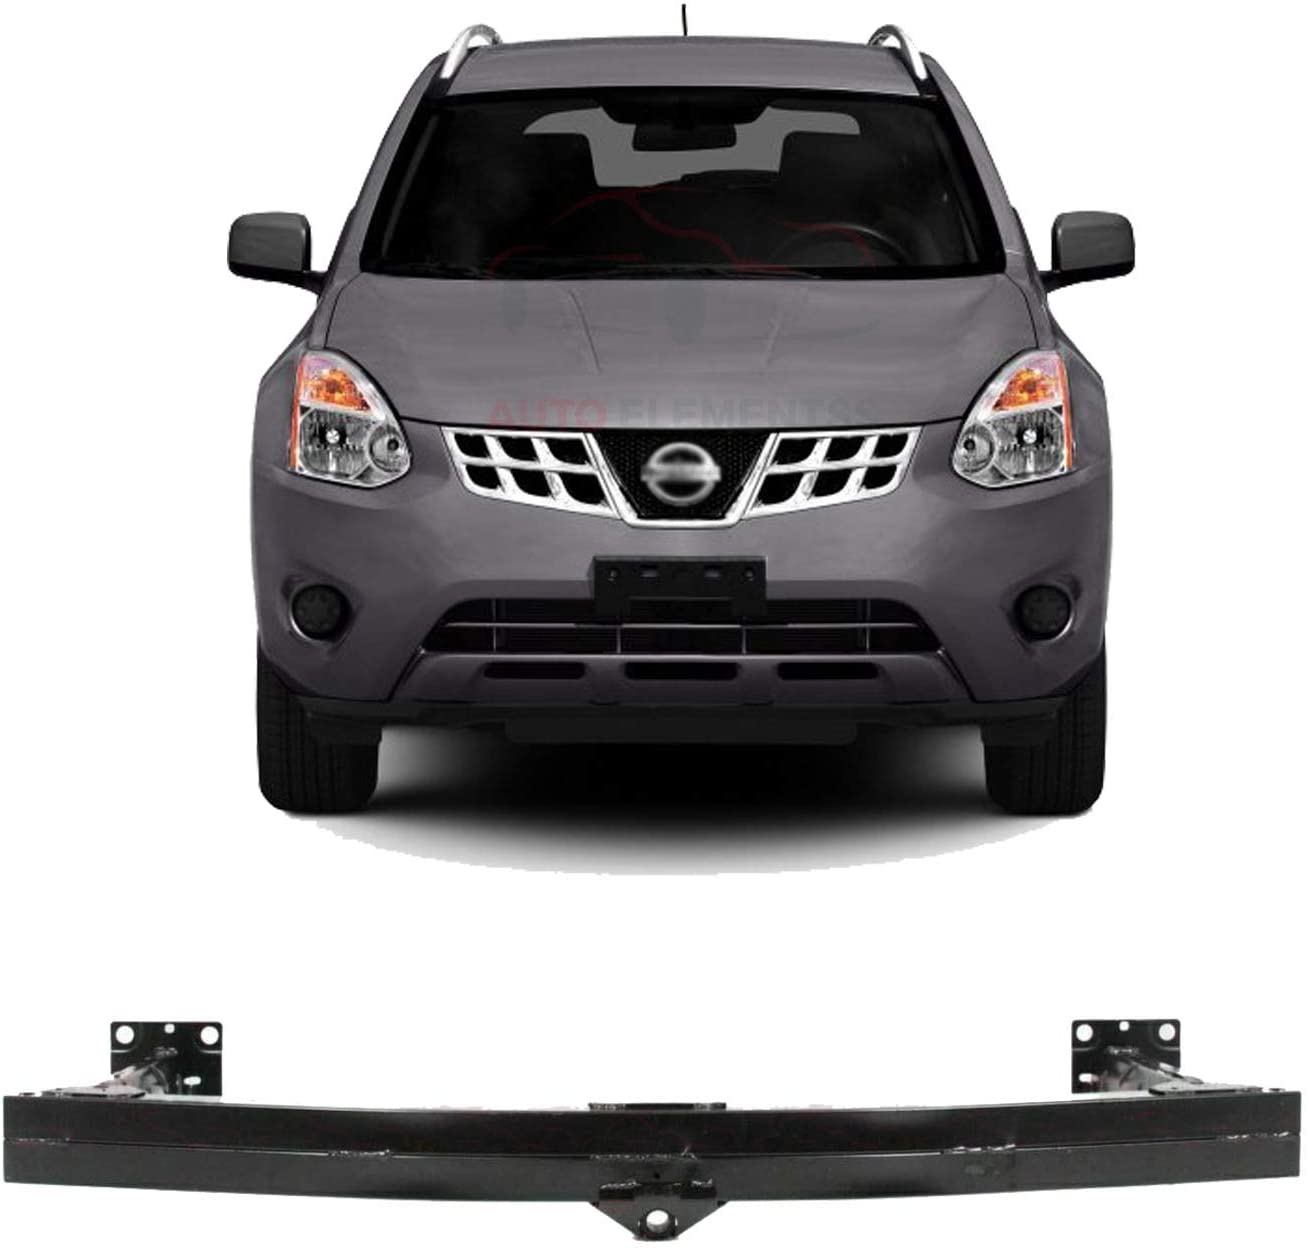 New Front Bumper Reinforcement Primed Steel Bar For 2008-2013 Nissan Rogue 2014-2015 Nissan Rogue Select S/Sl/Sv/Krom Sport Utility Direct Replacement Ni1006223 62030jm00a